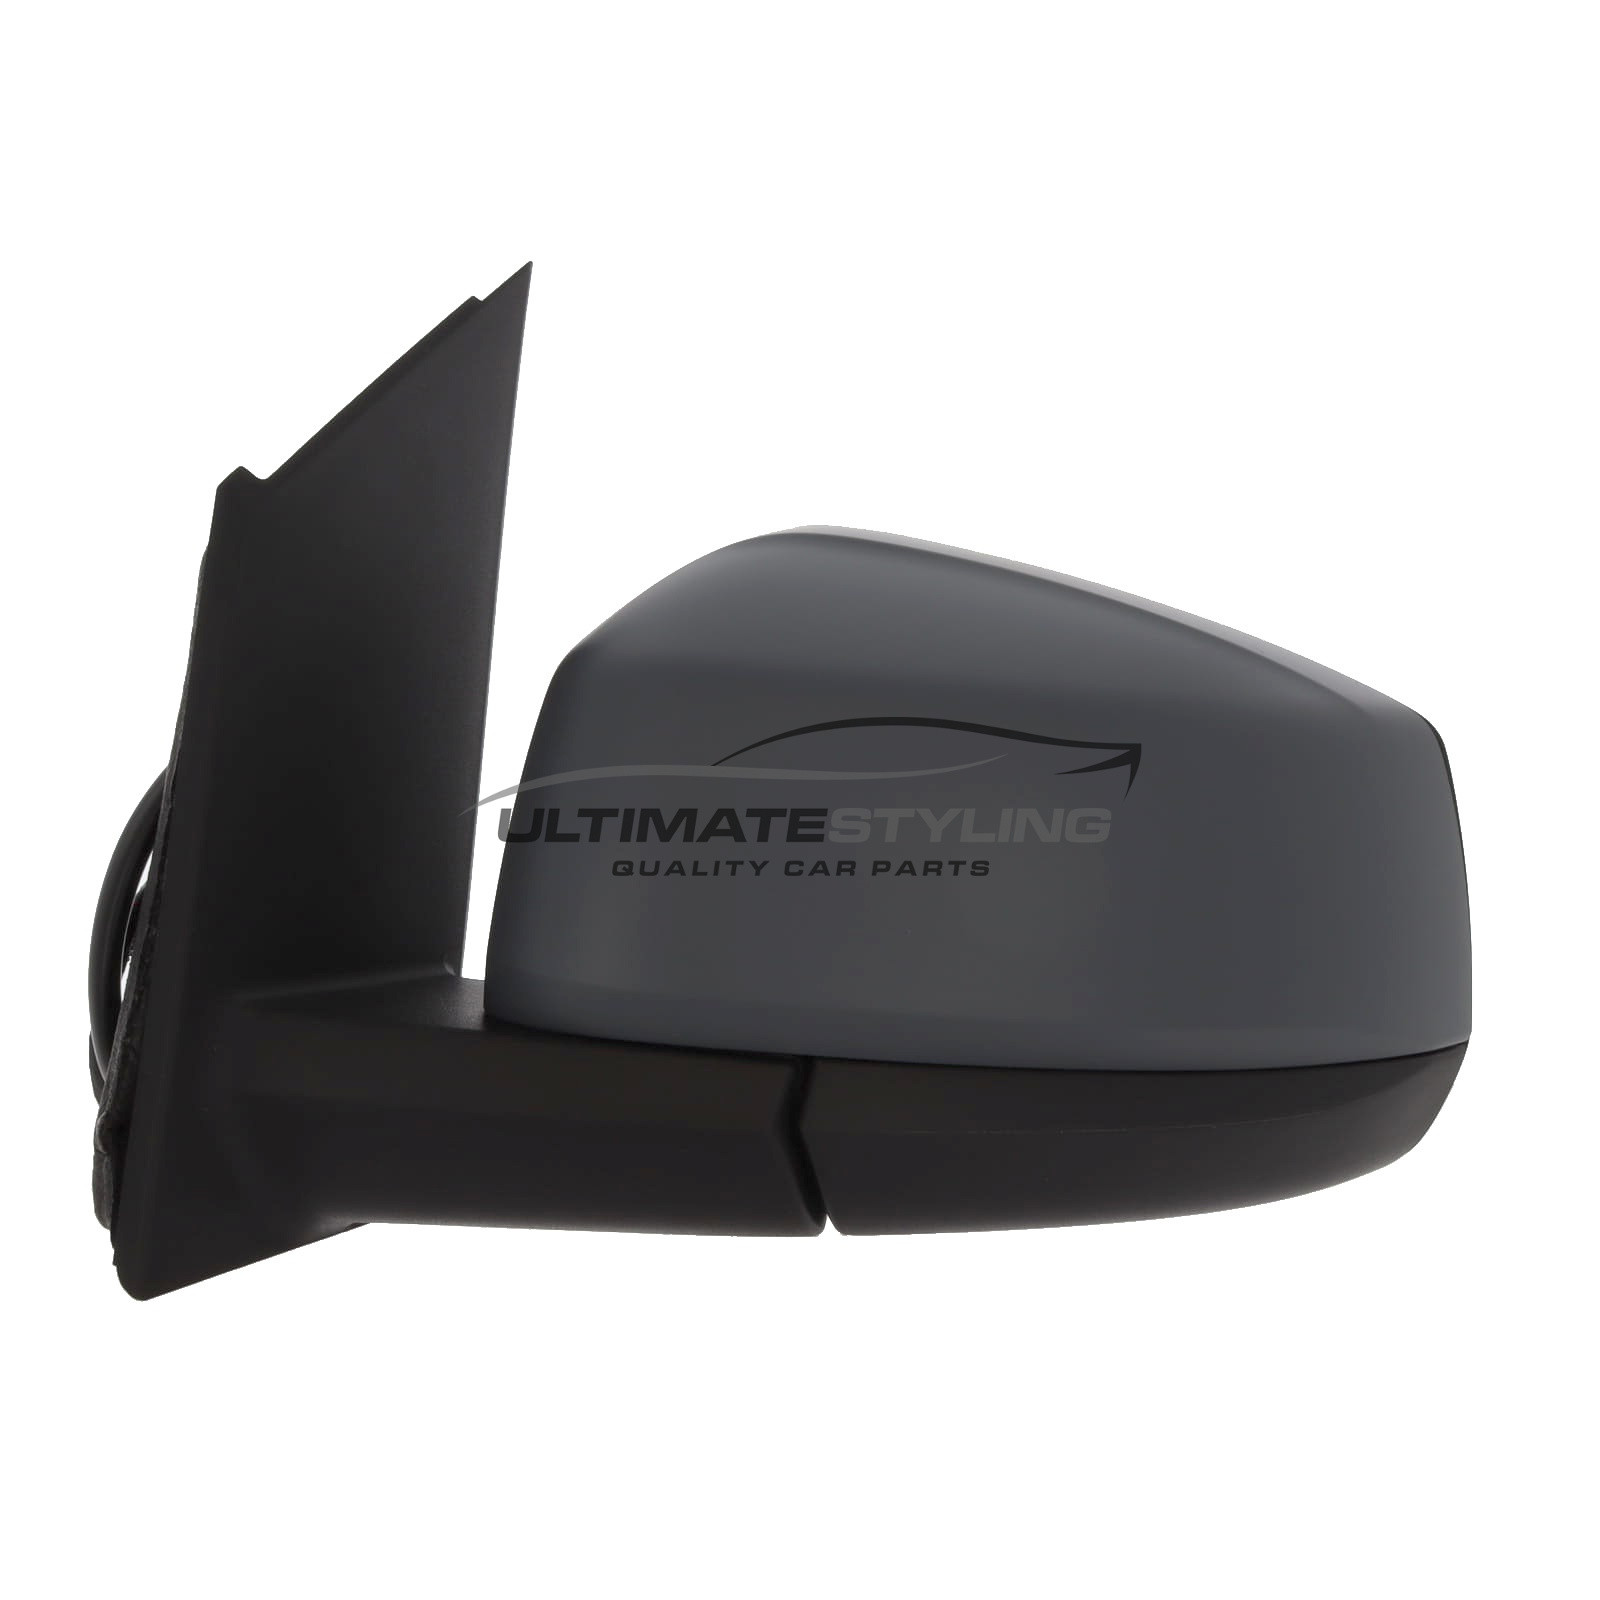 VW Caddy Wing Mirror / Door Mirror - Passenger Side (LH) - Electric adjustment - Heated Glass - Primed